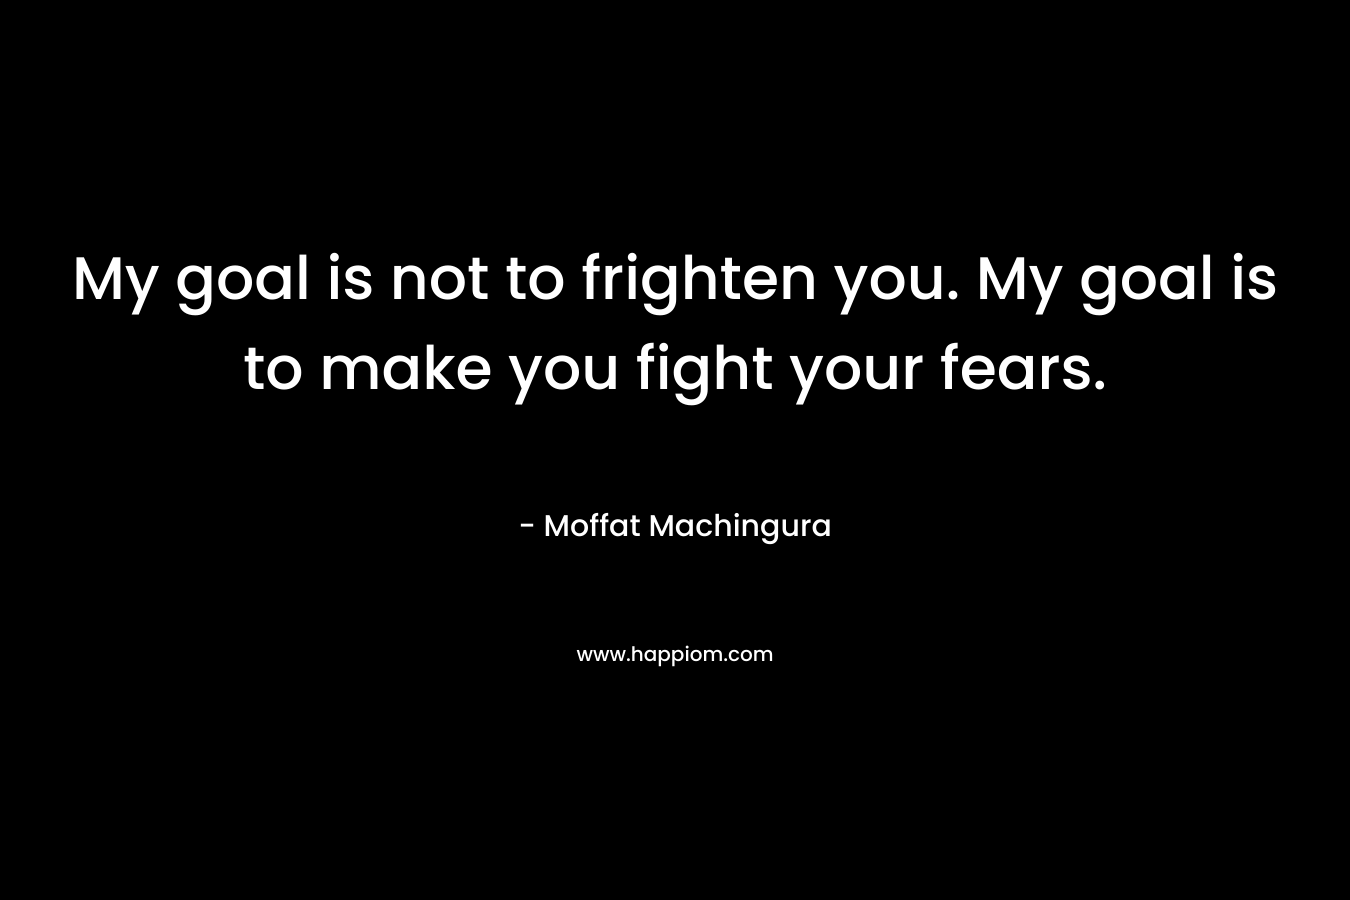 My goal is not to frighten you. My goal is to make you fight your fears. – Moffat Machingura